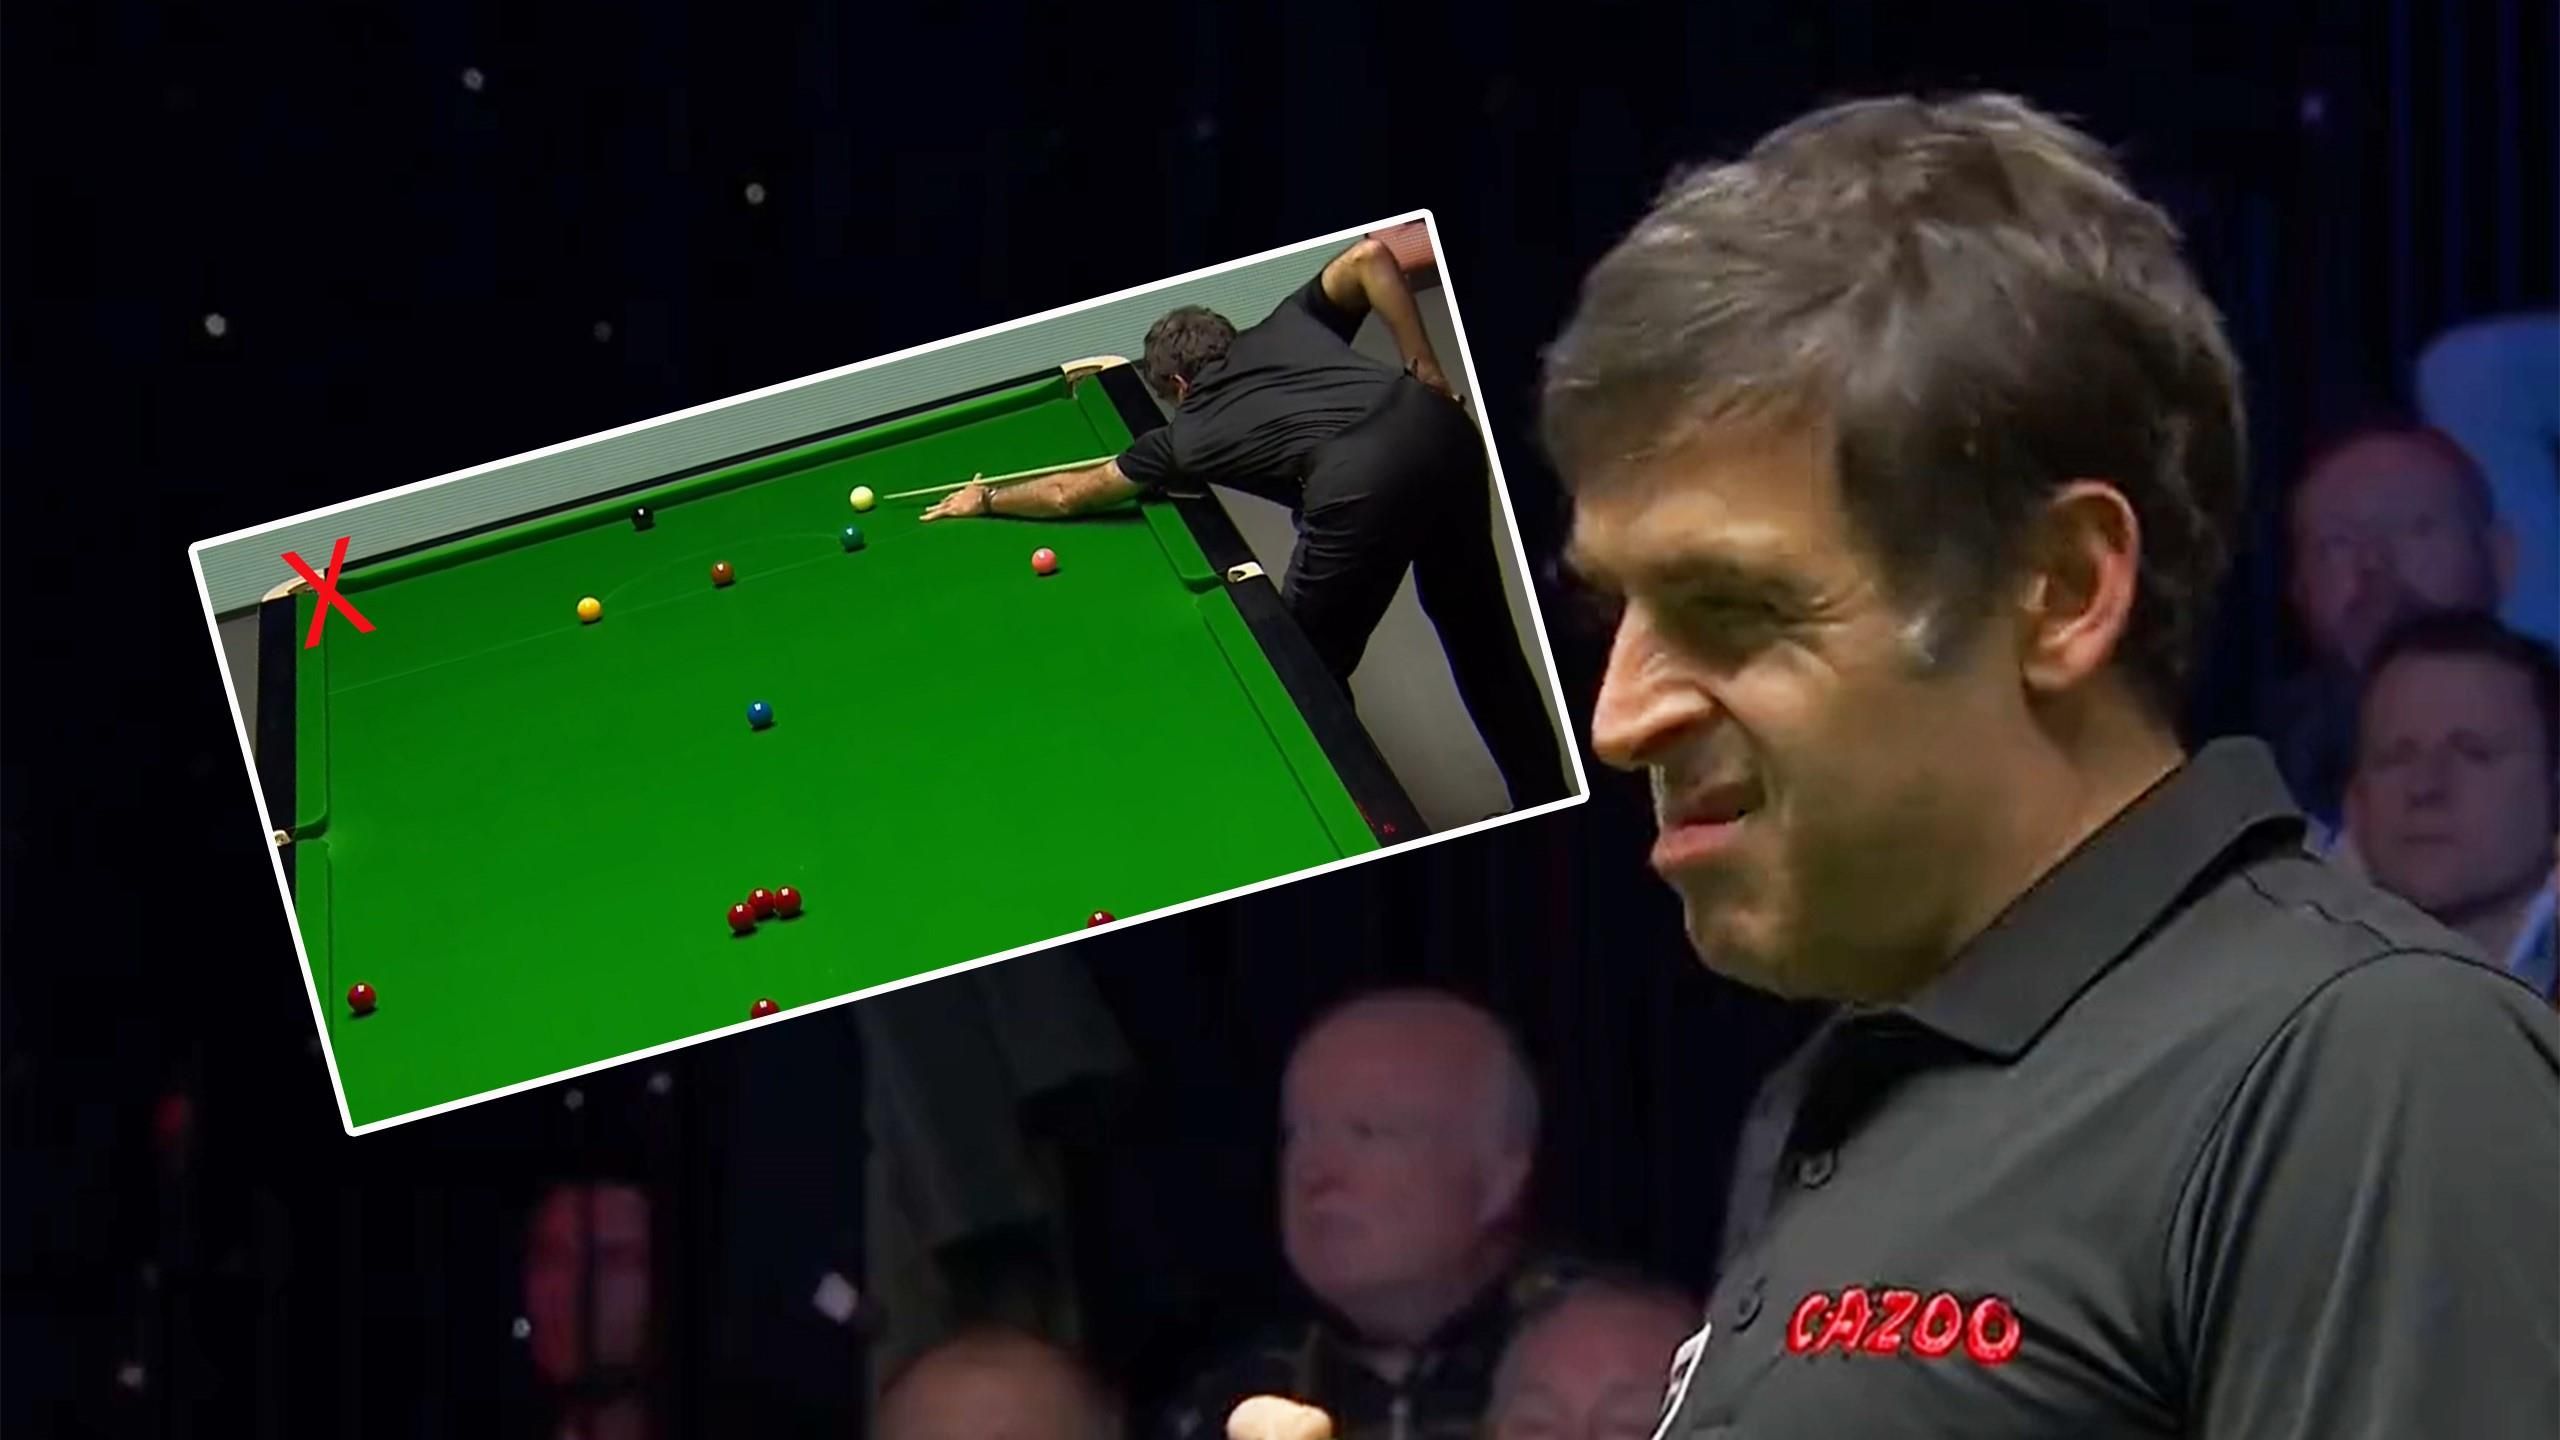 Ronnie OSullivan gets outrageous luck on black in Champion of Champions semi-final - Biggest fluke of the tournament!